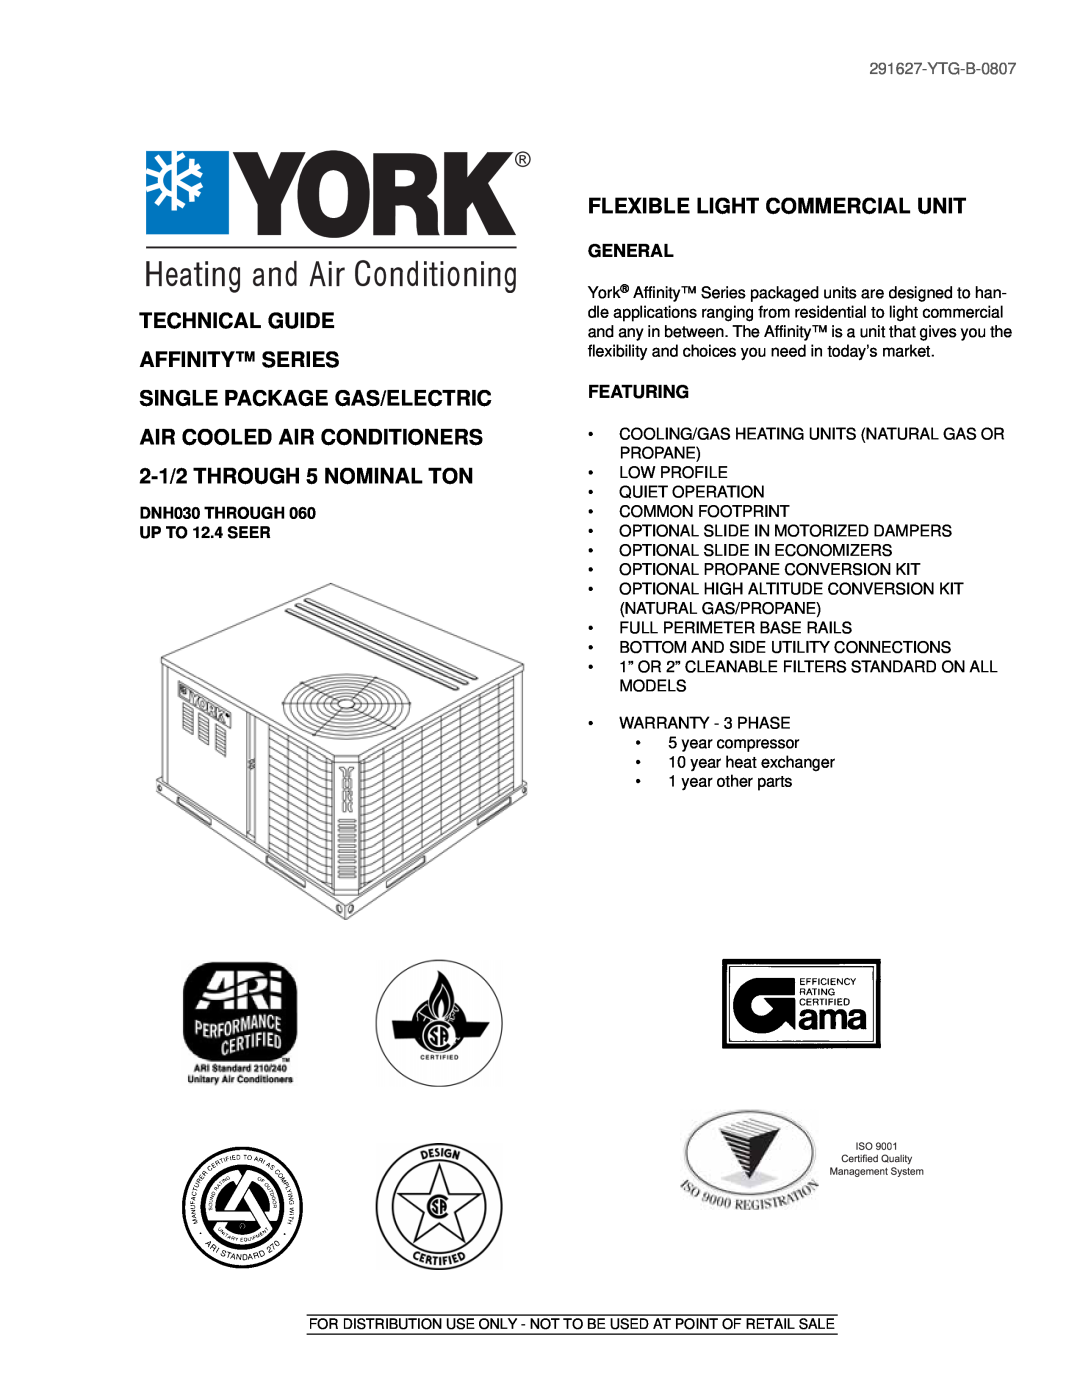 York 291627-YTG-B-0807 warranty Technical Guide Affinity Series, Flexible Light Commercial Unit, General, Featuring 